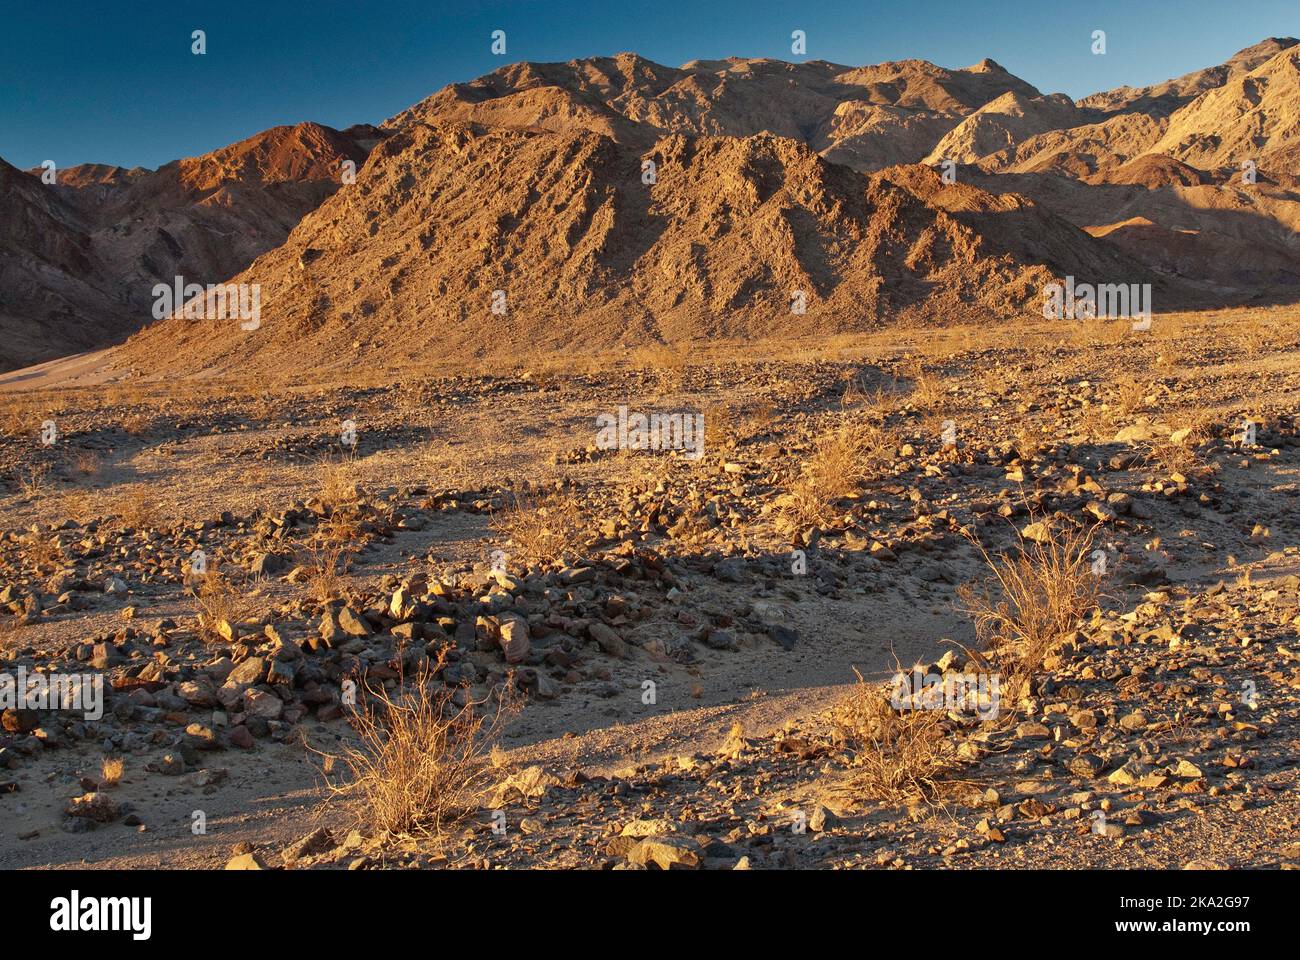 Black Mountains at sunset from Jubilee Pass Road, Mojave Desert, Death Valley National Park, California, USA Stock Photo